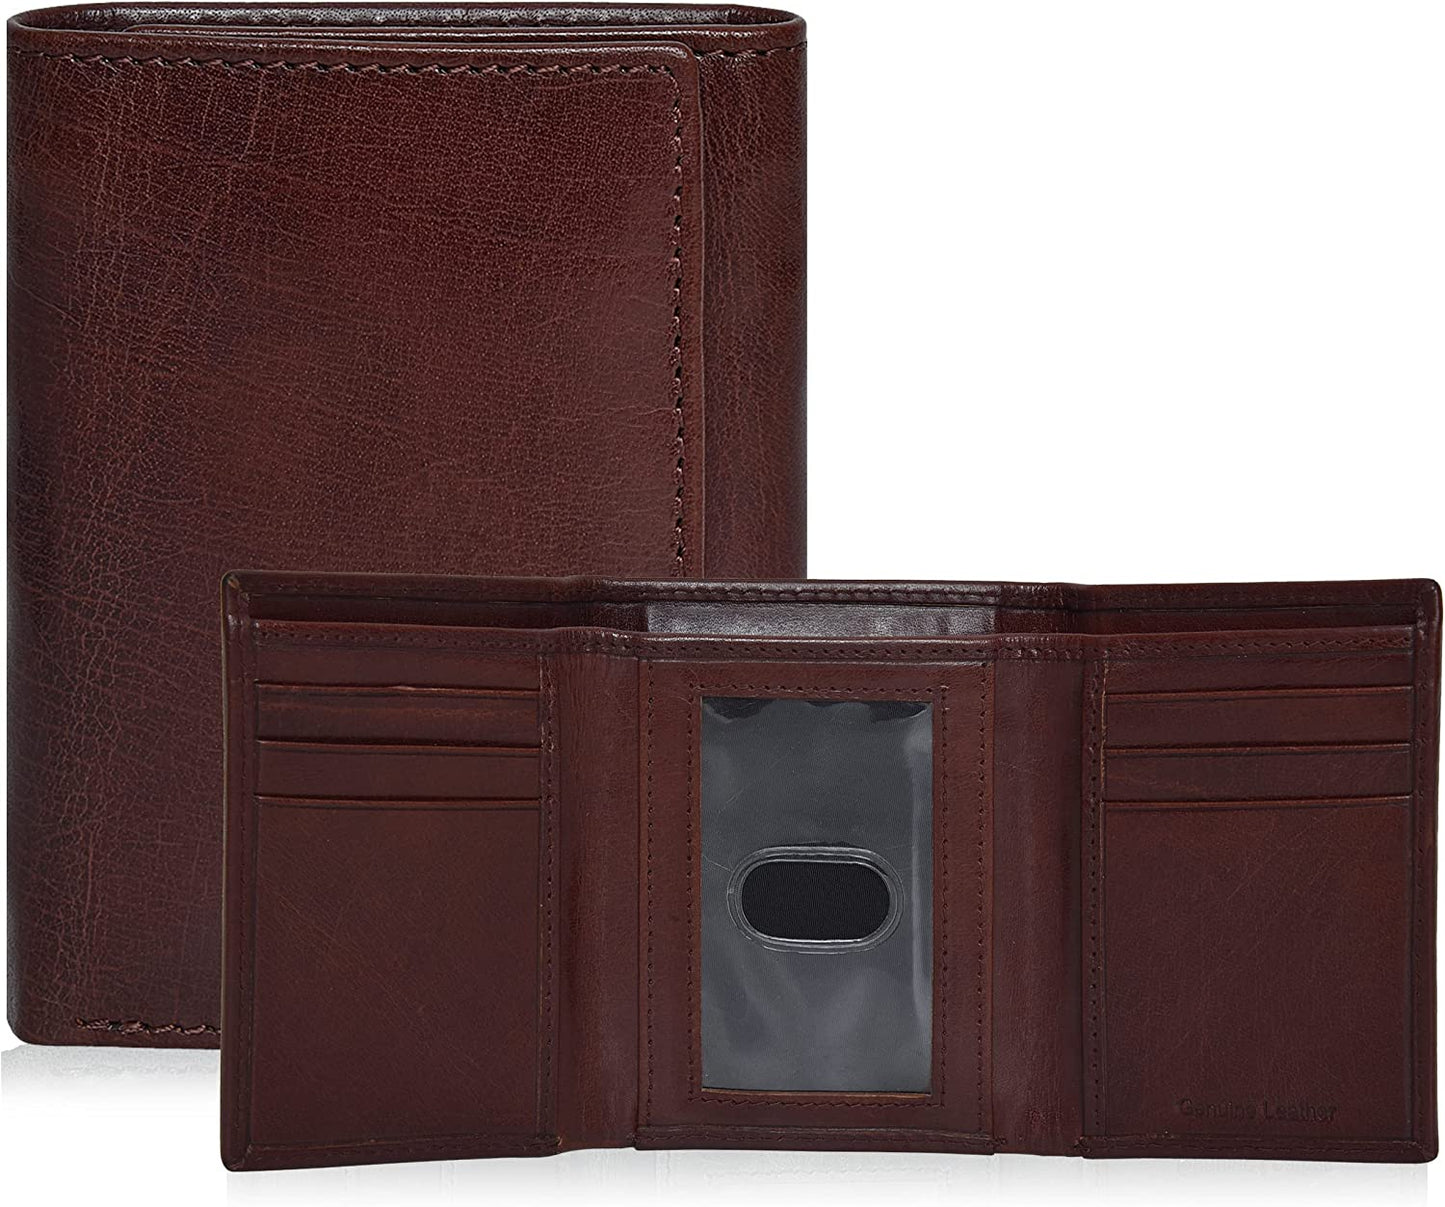 BiFold Leather Wallet